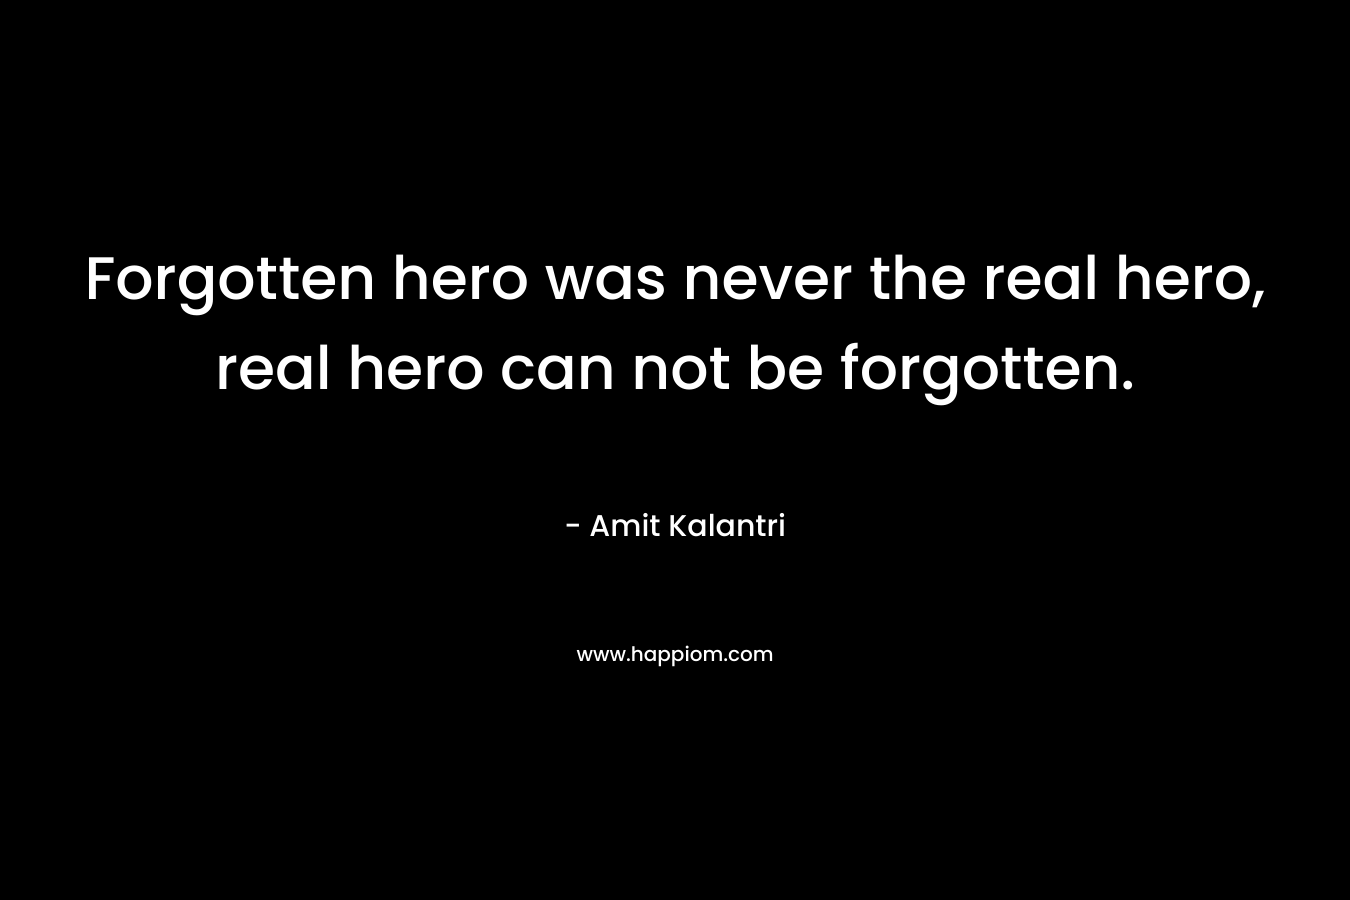 Forgotten hero was never the real hero, real hero can not be forgotten.